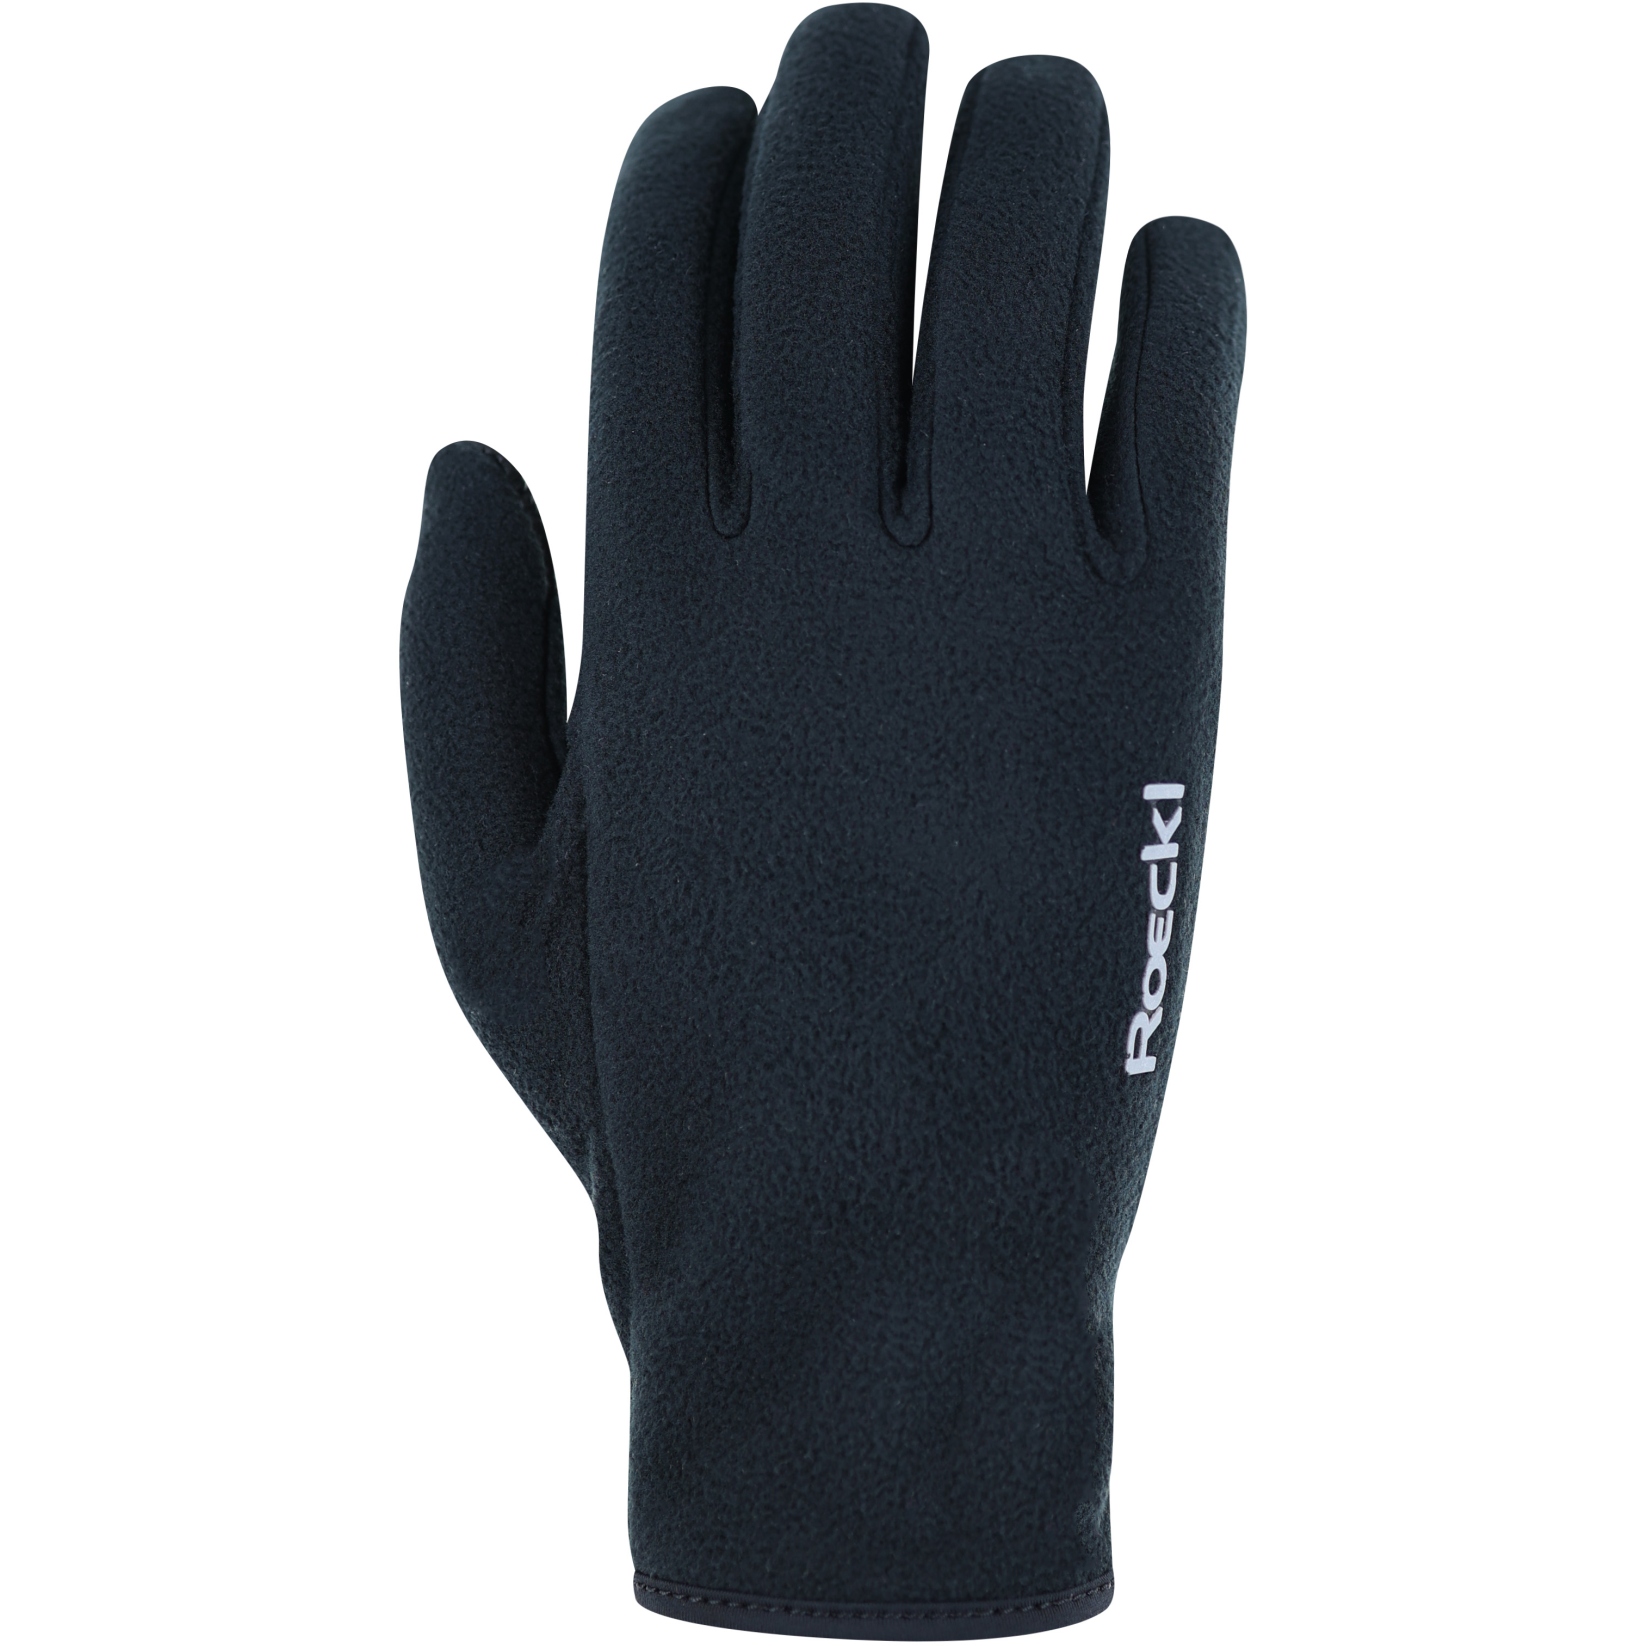 Picture of Roeckl Sports Kampen 2 Winter Gloves - black 9000